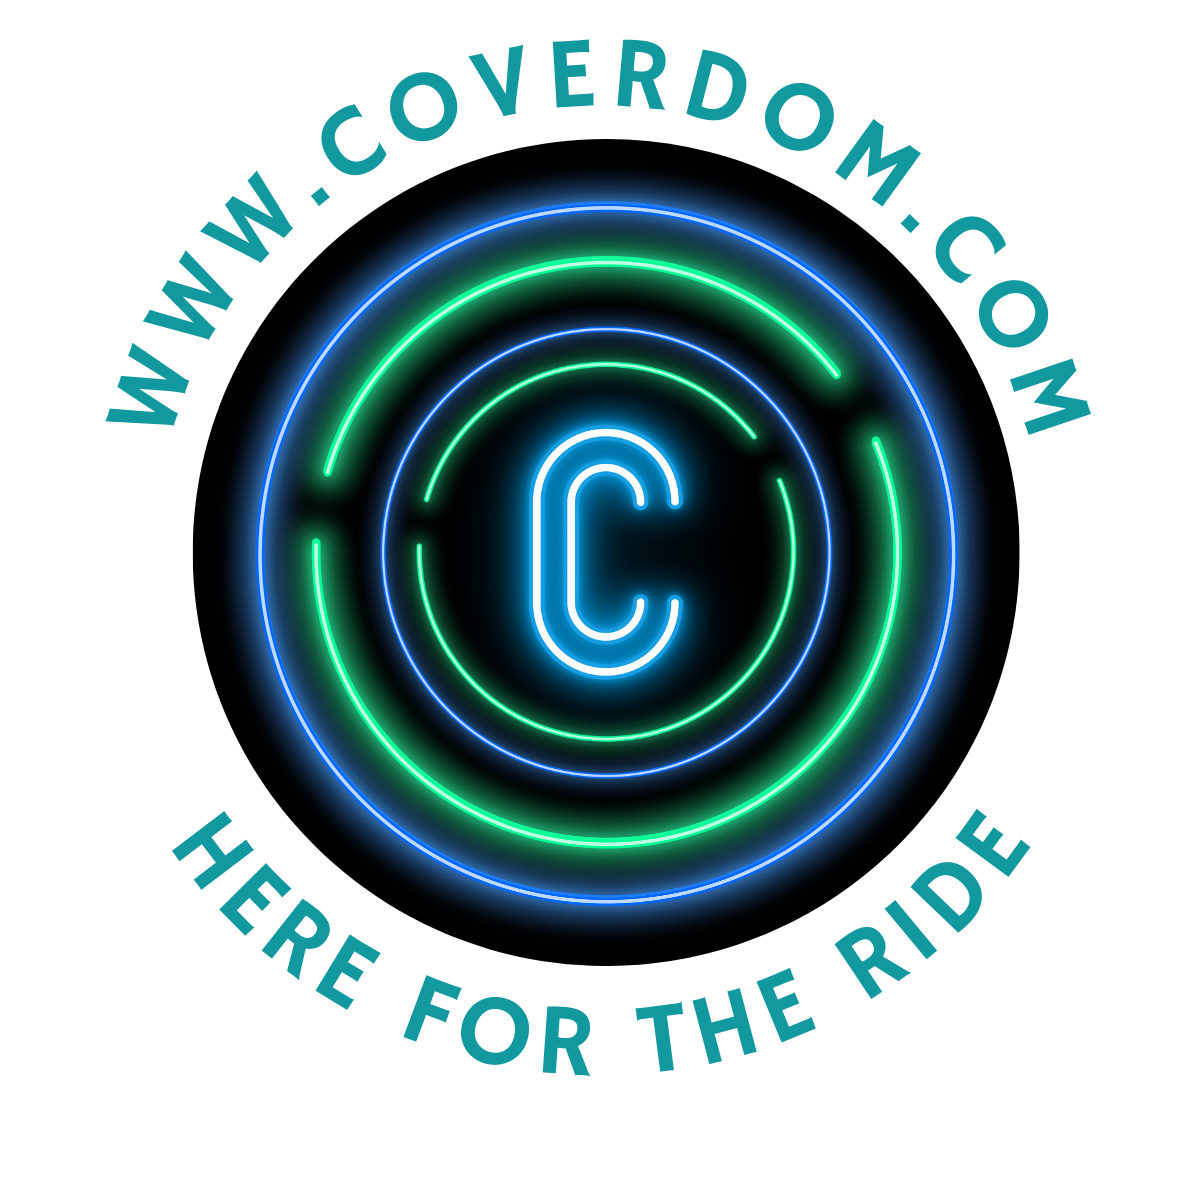 coverdom tire covers